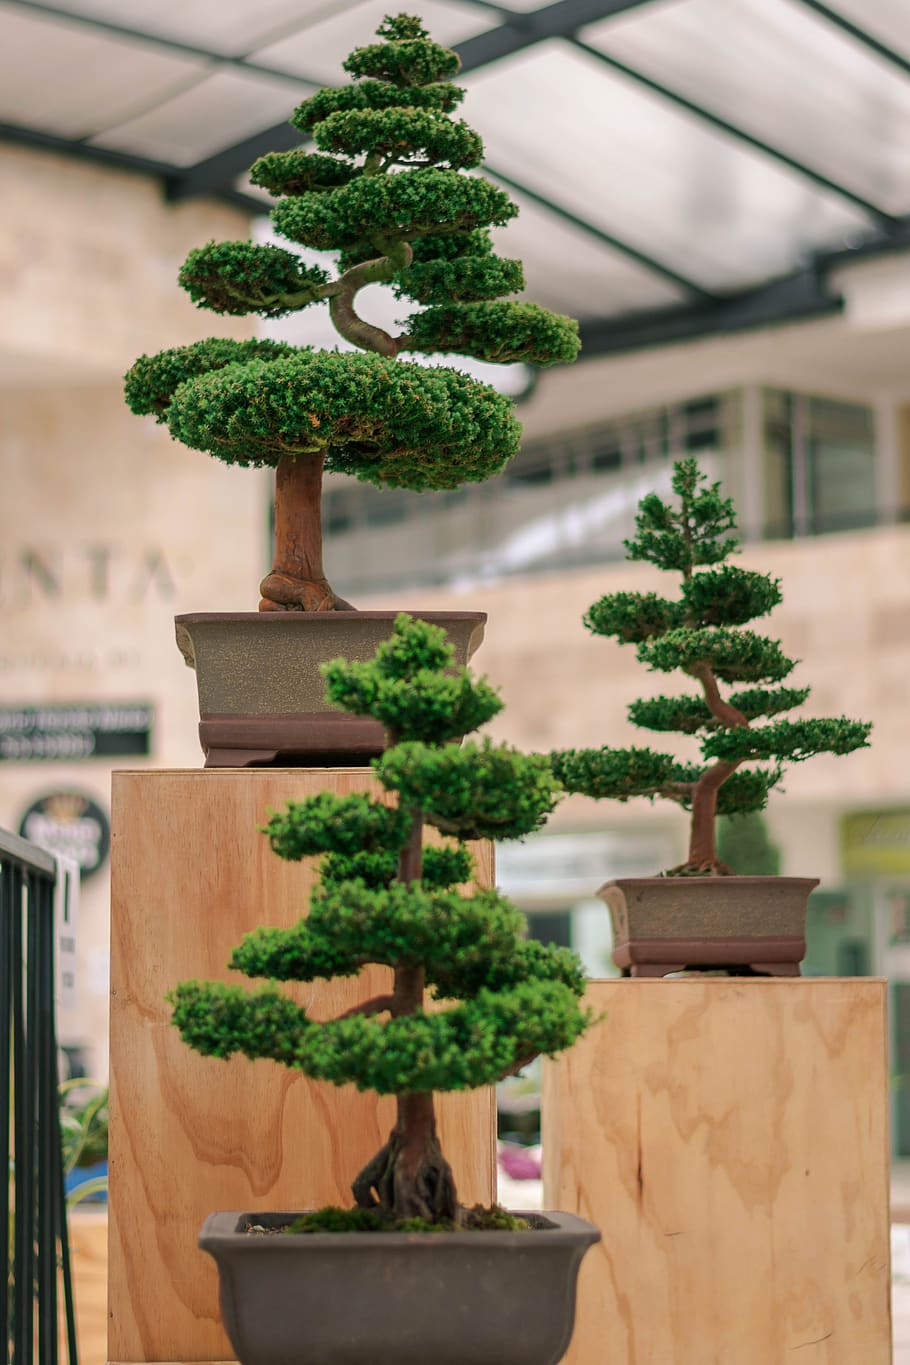 bonsai, trees, plant, art, small, ecology, growth, potted plant, green color, tree